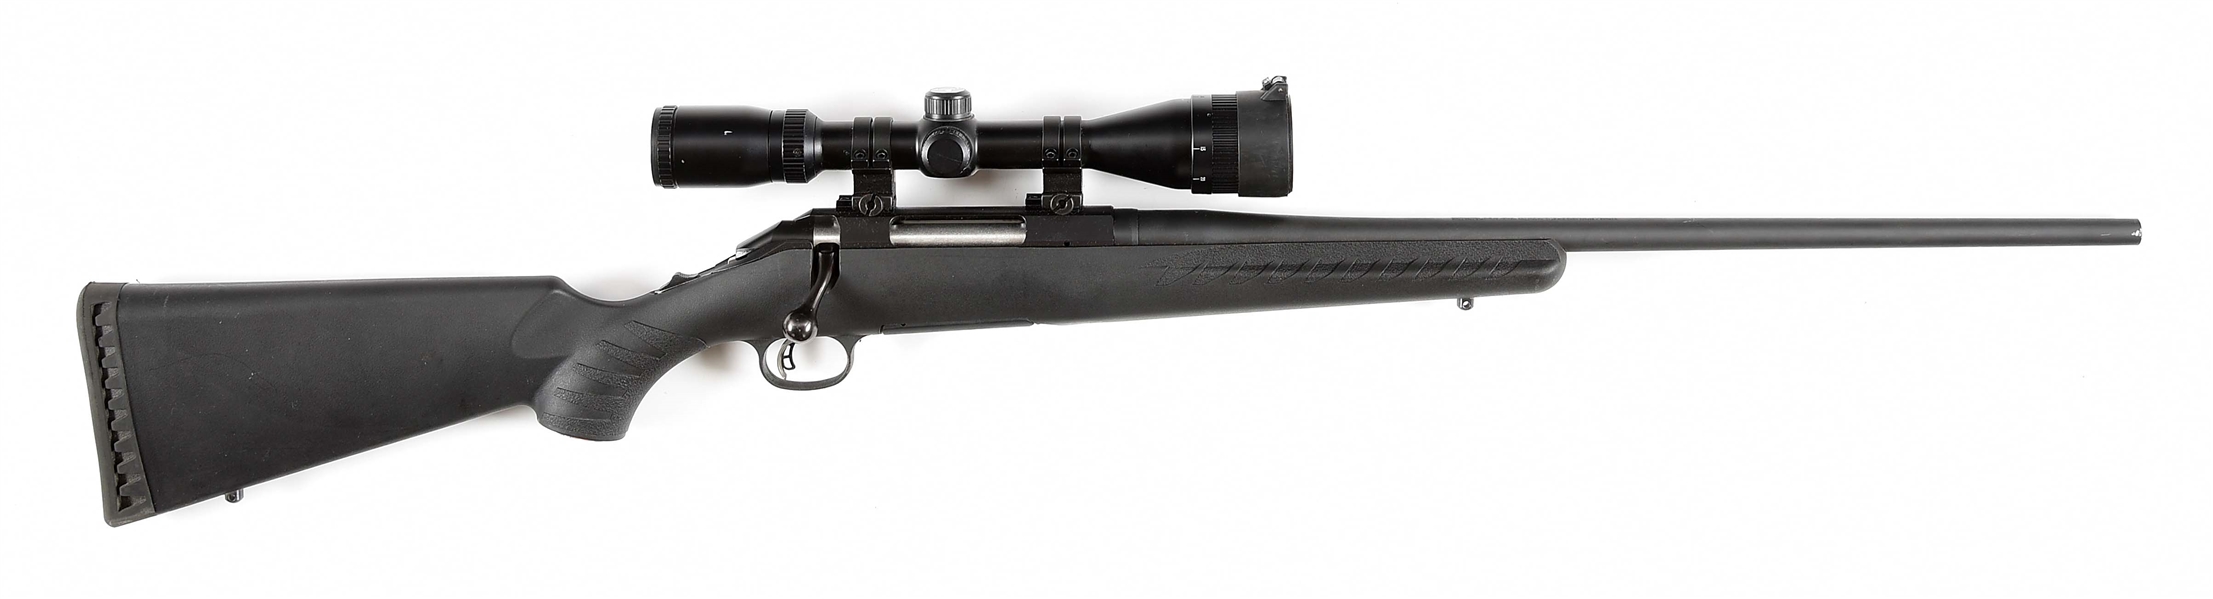 (M) RUGER AMERICAN BOLT ACTION RIFLE .308 WIN.